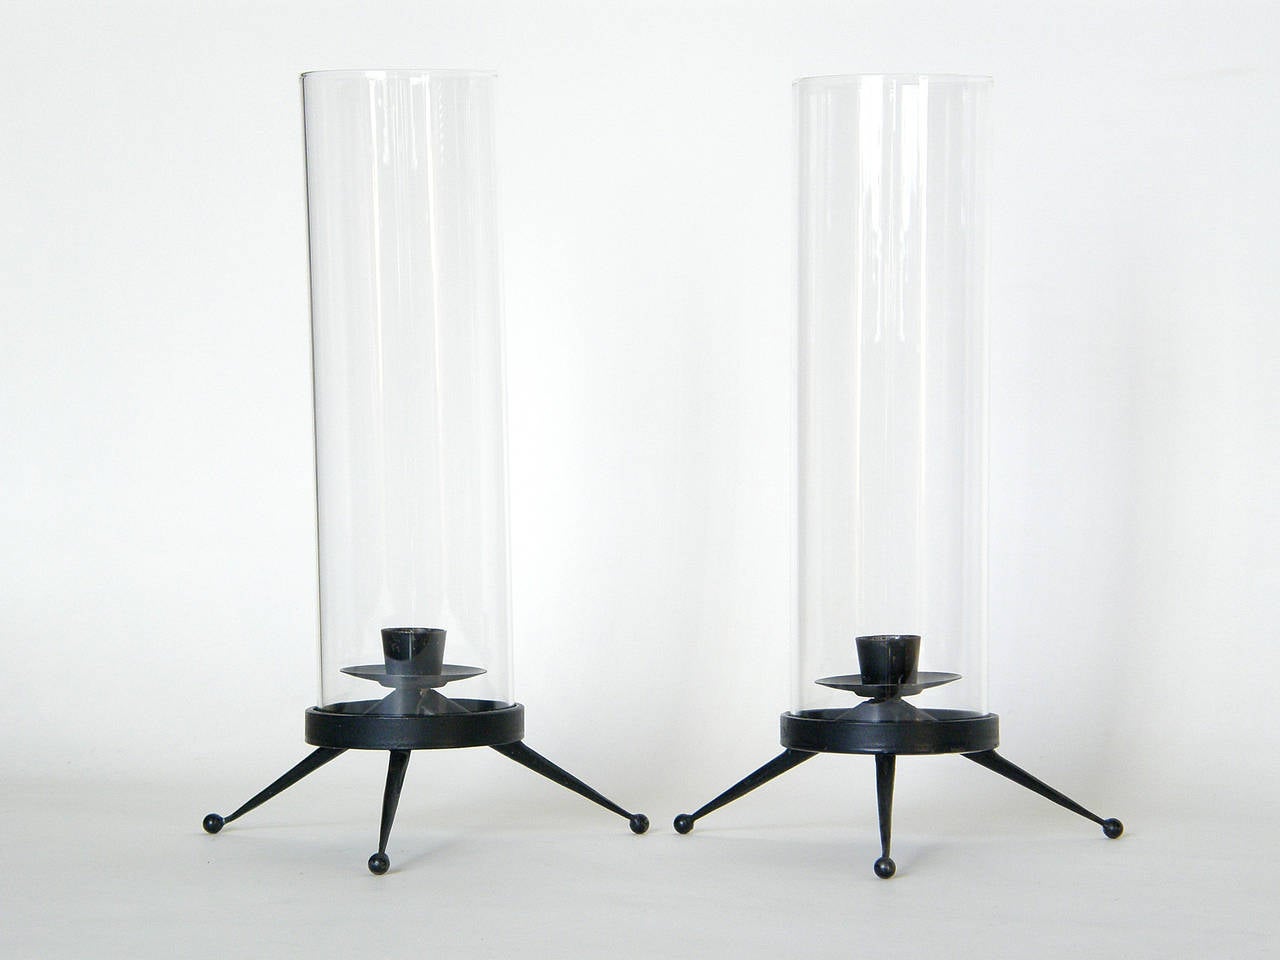 Pair of iron tripod candleholders with glass hurricane shades from the  Candelabra Group designed by Tony Paul and manufactured by Woodlin-Hall.

Please contact us if you have any questions.